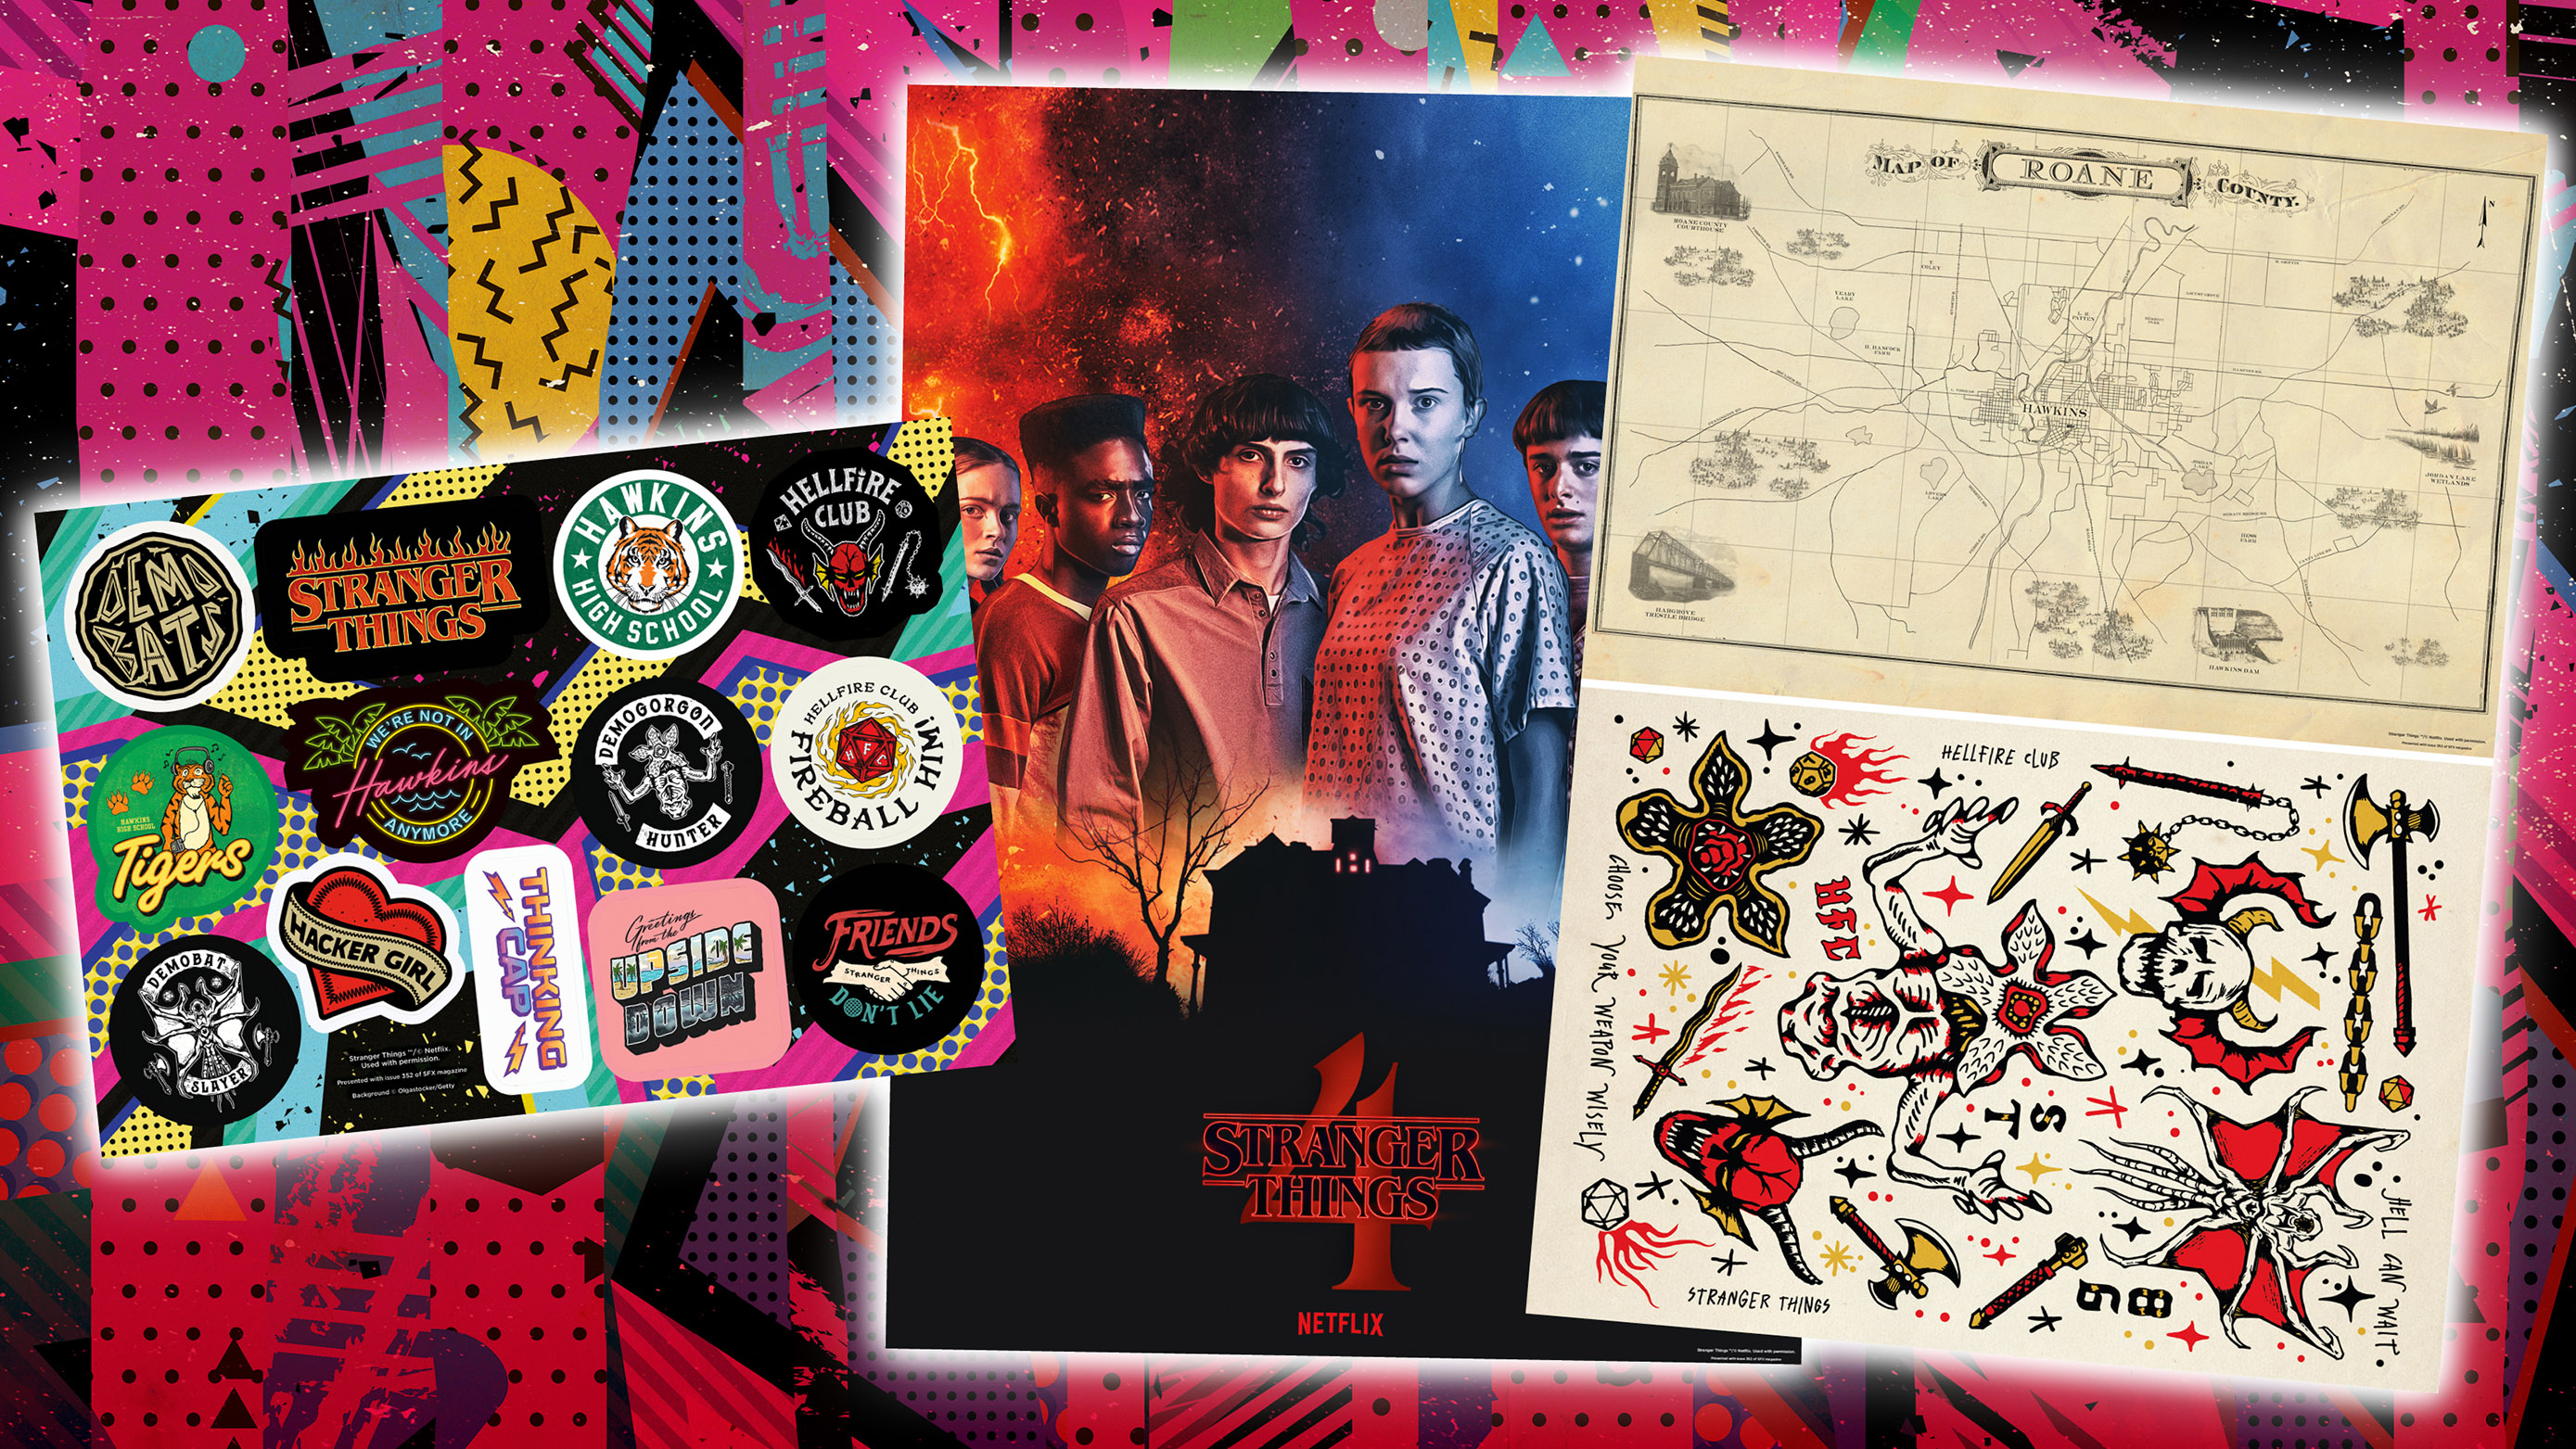 The SFX issue 352 poster and stickers.